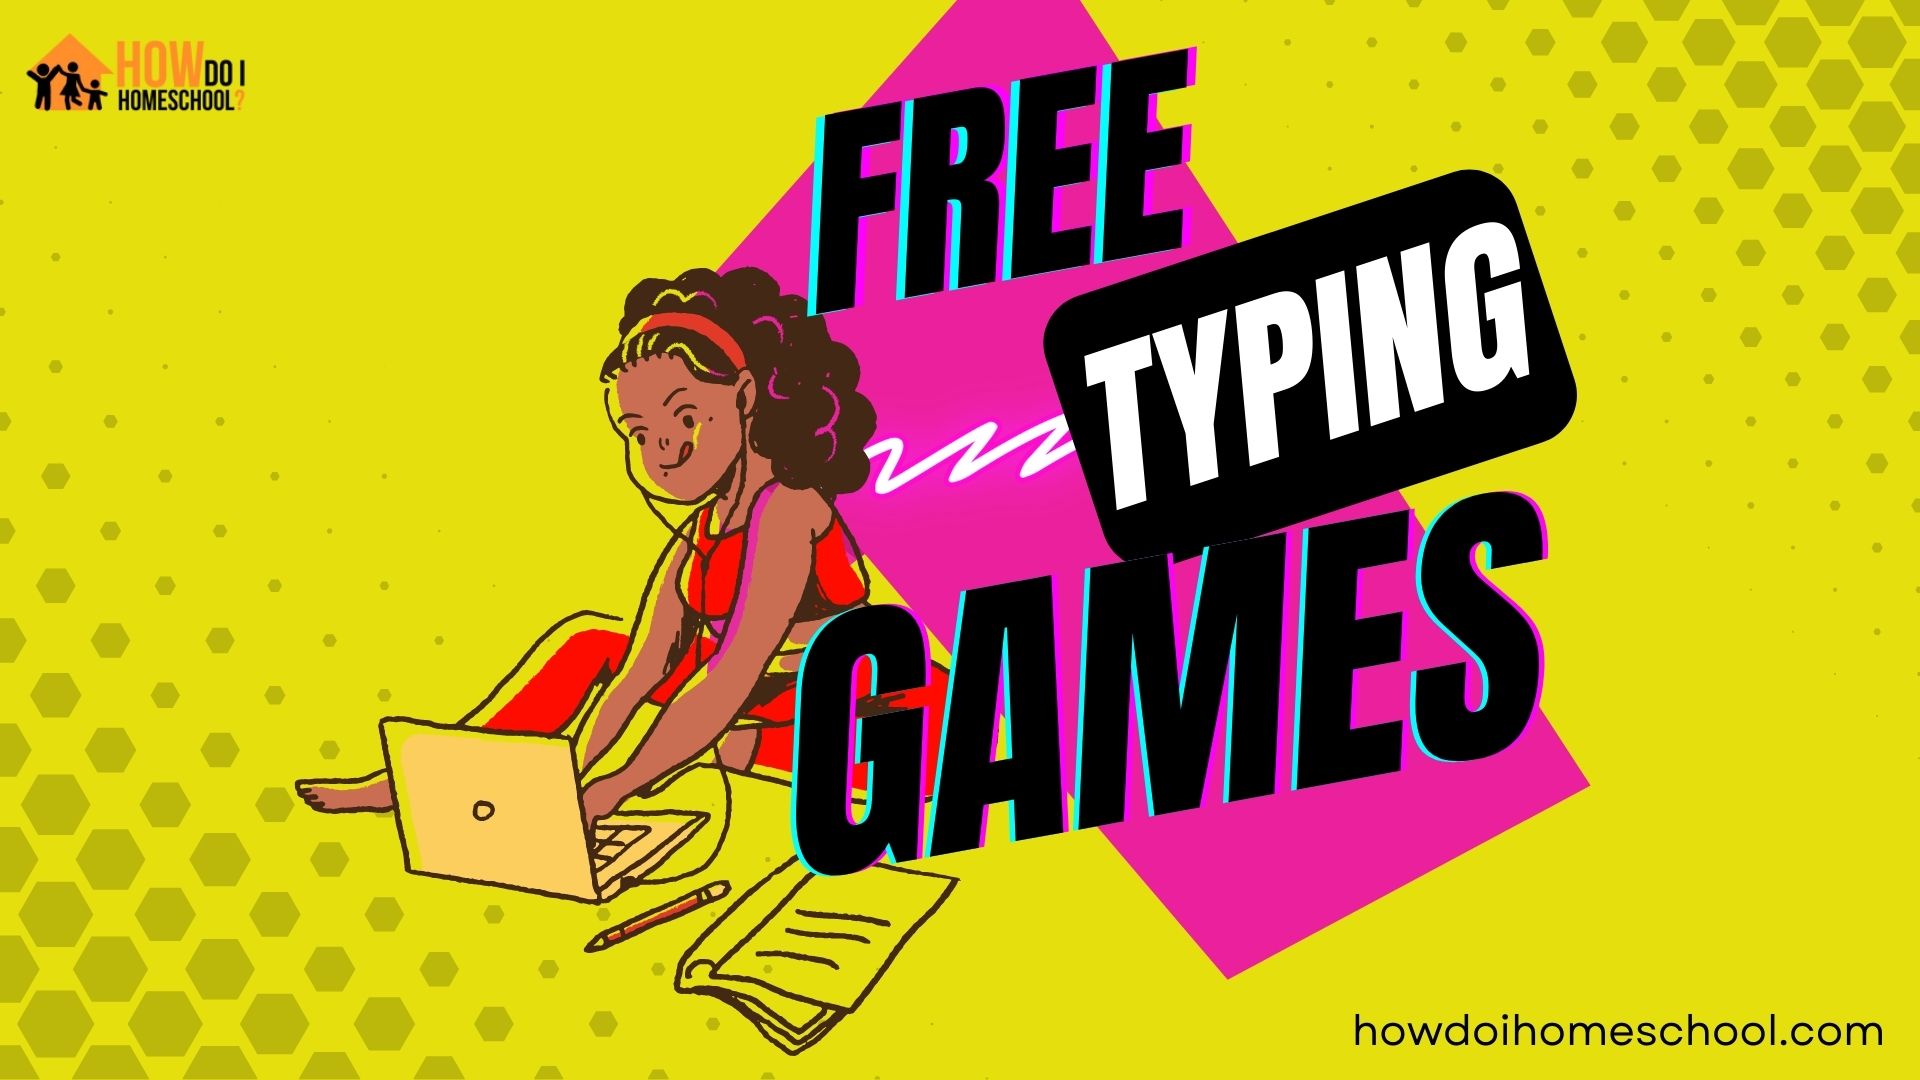 Top 5 Free Online Typing Games for Students to For Kids to Improve Their  Typing Skills